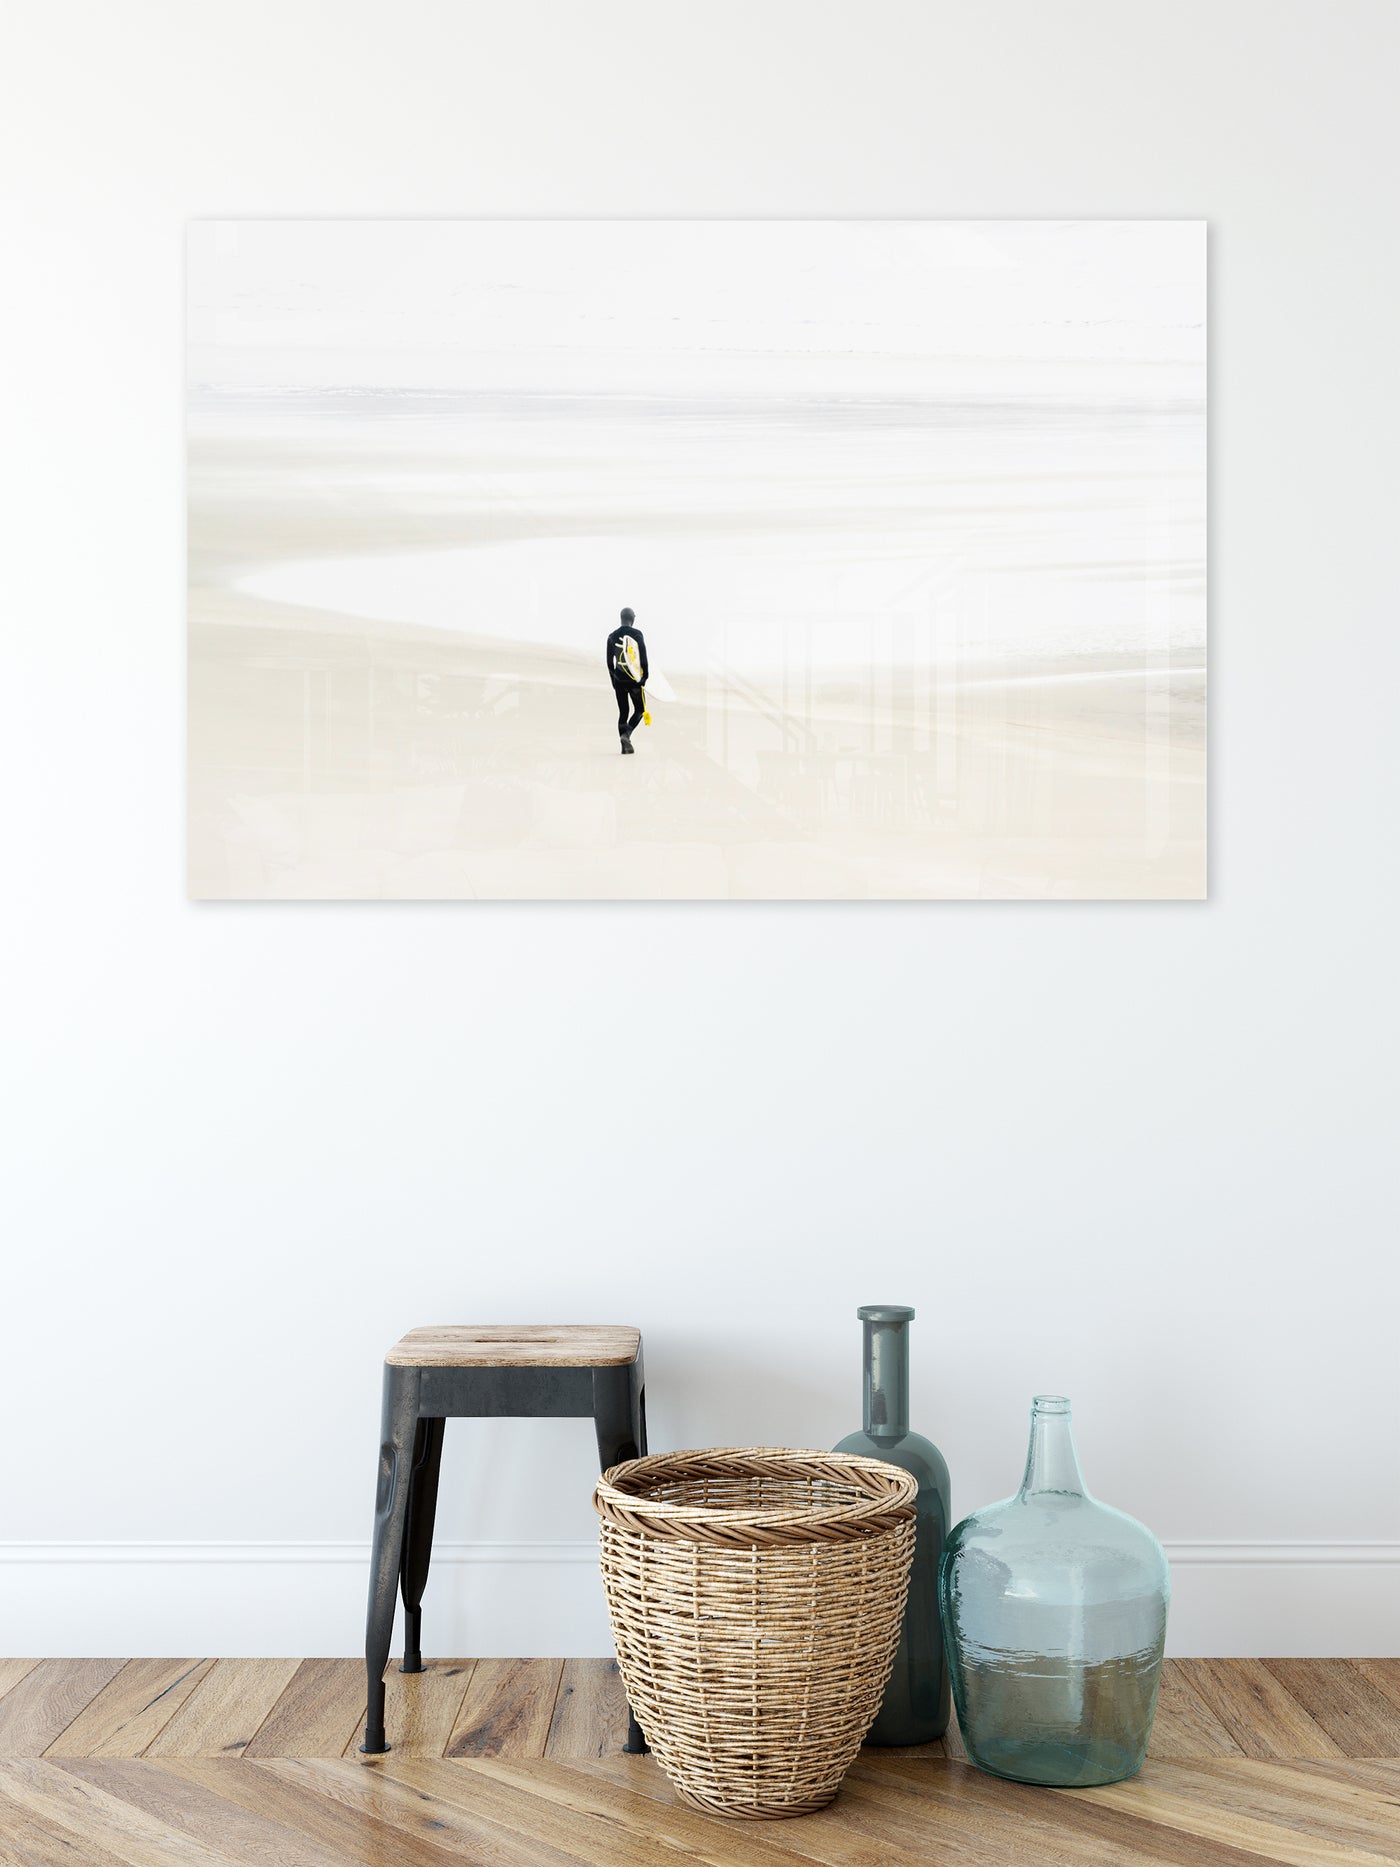 Surfer No 3 - Acrylic glass print by Cattie Coyle Photography in entryway